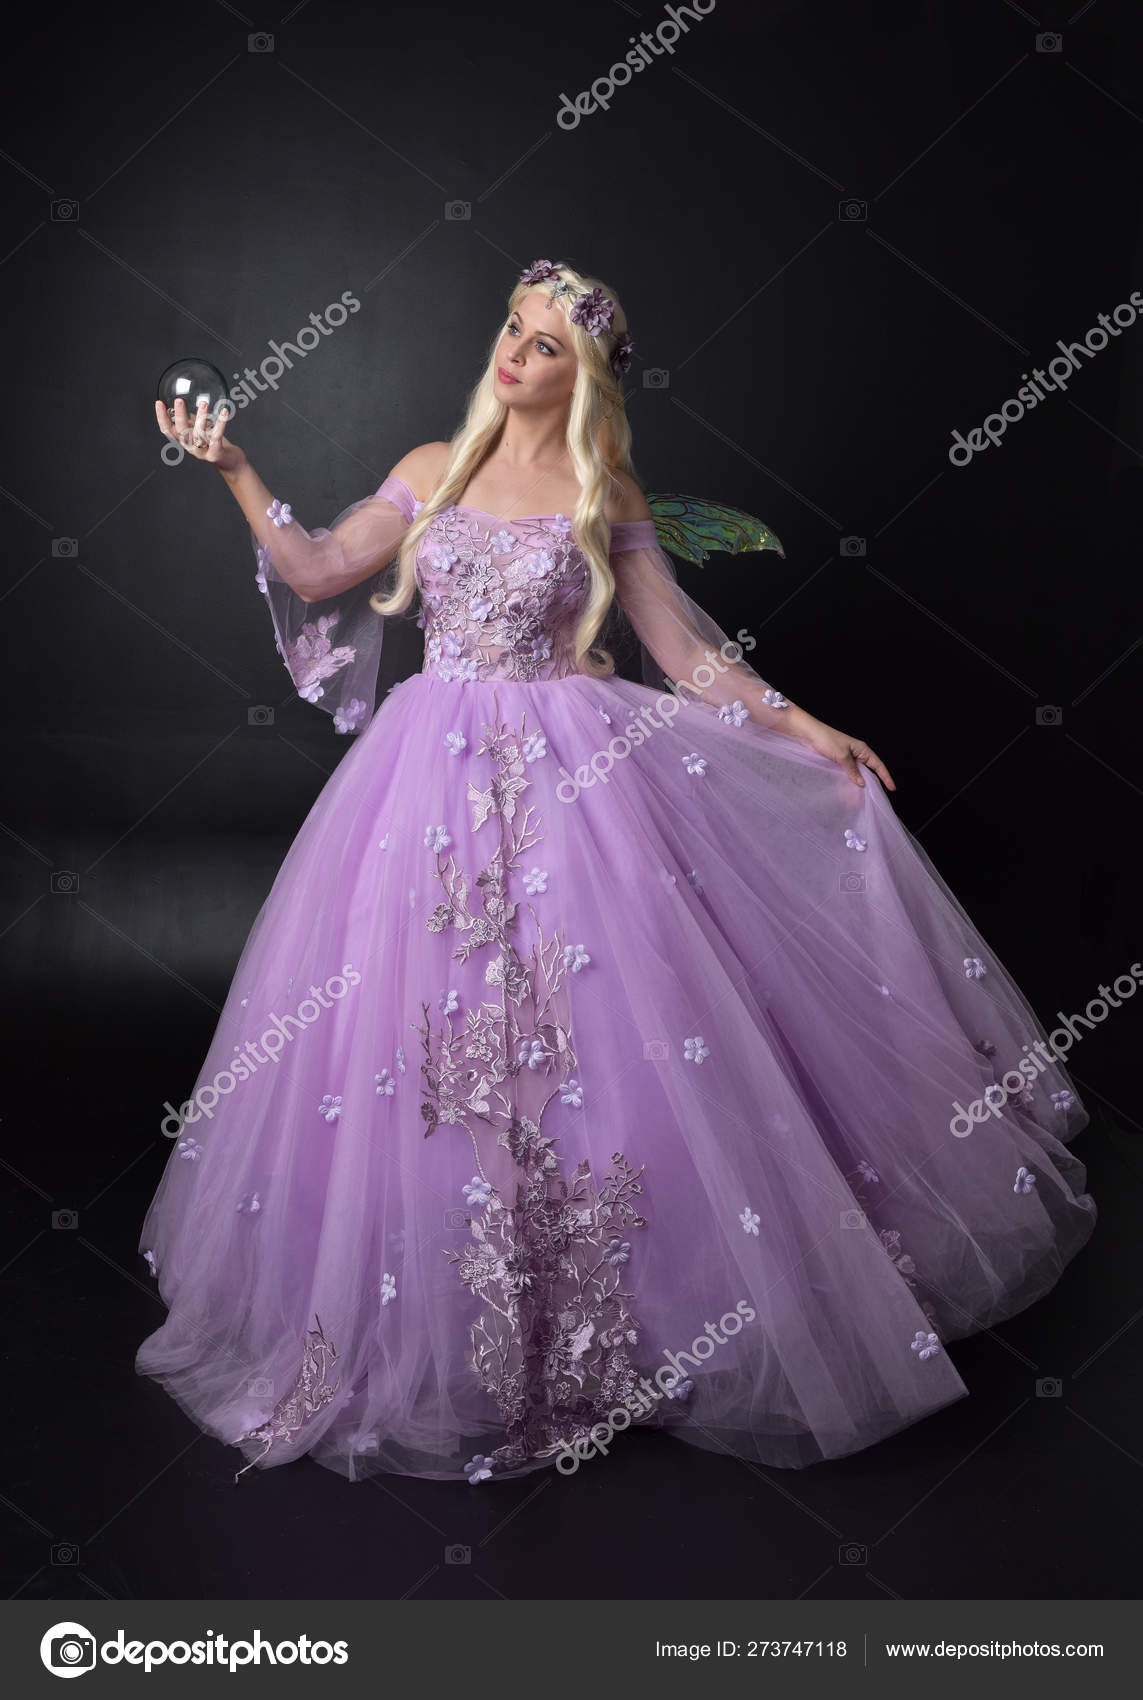 Woman Ball Gown Posing Photographers Indoors Stock Photo 1529576918 |  Shutterstock